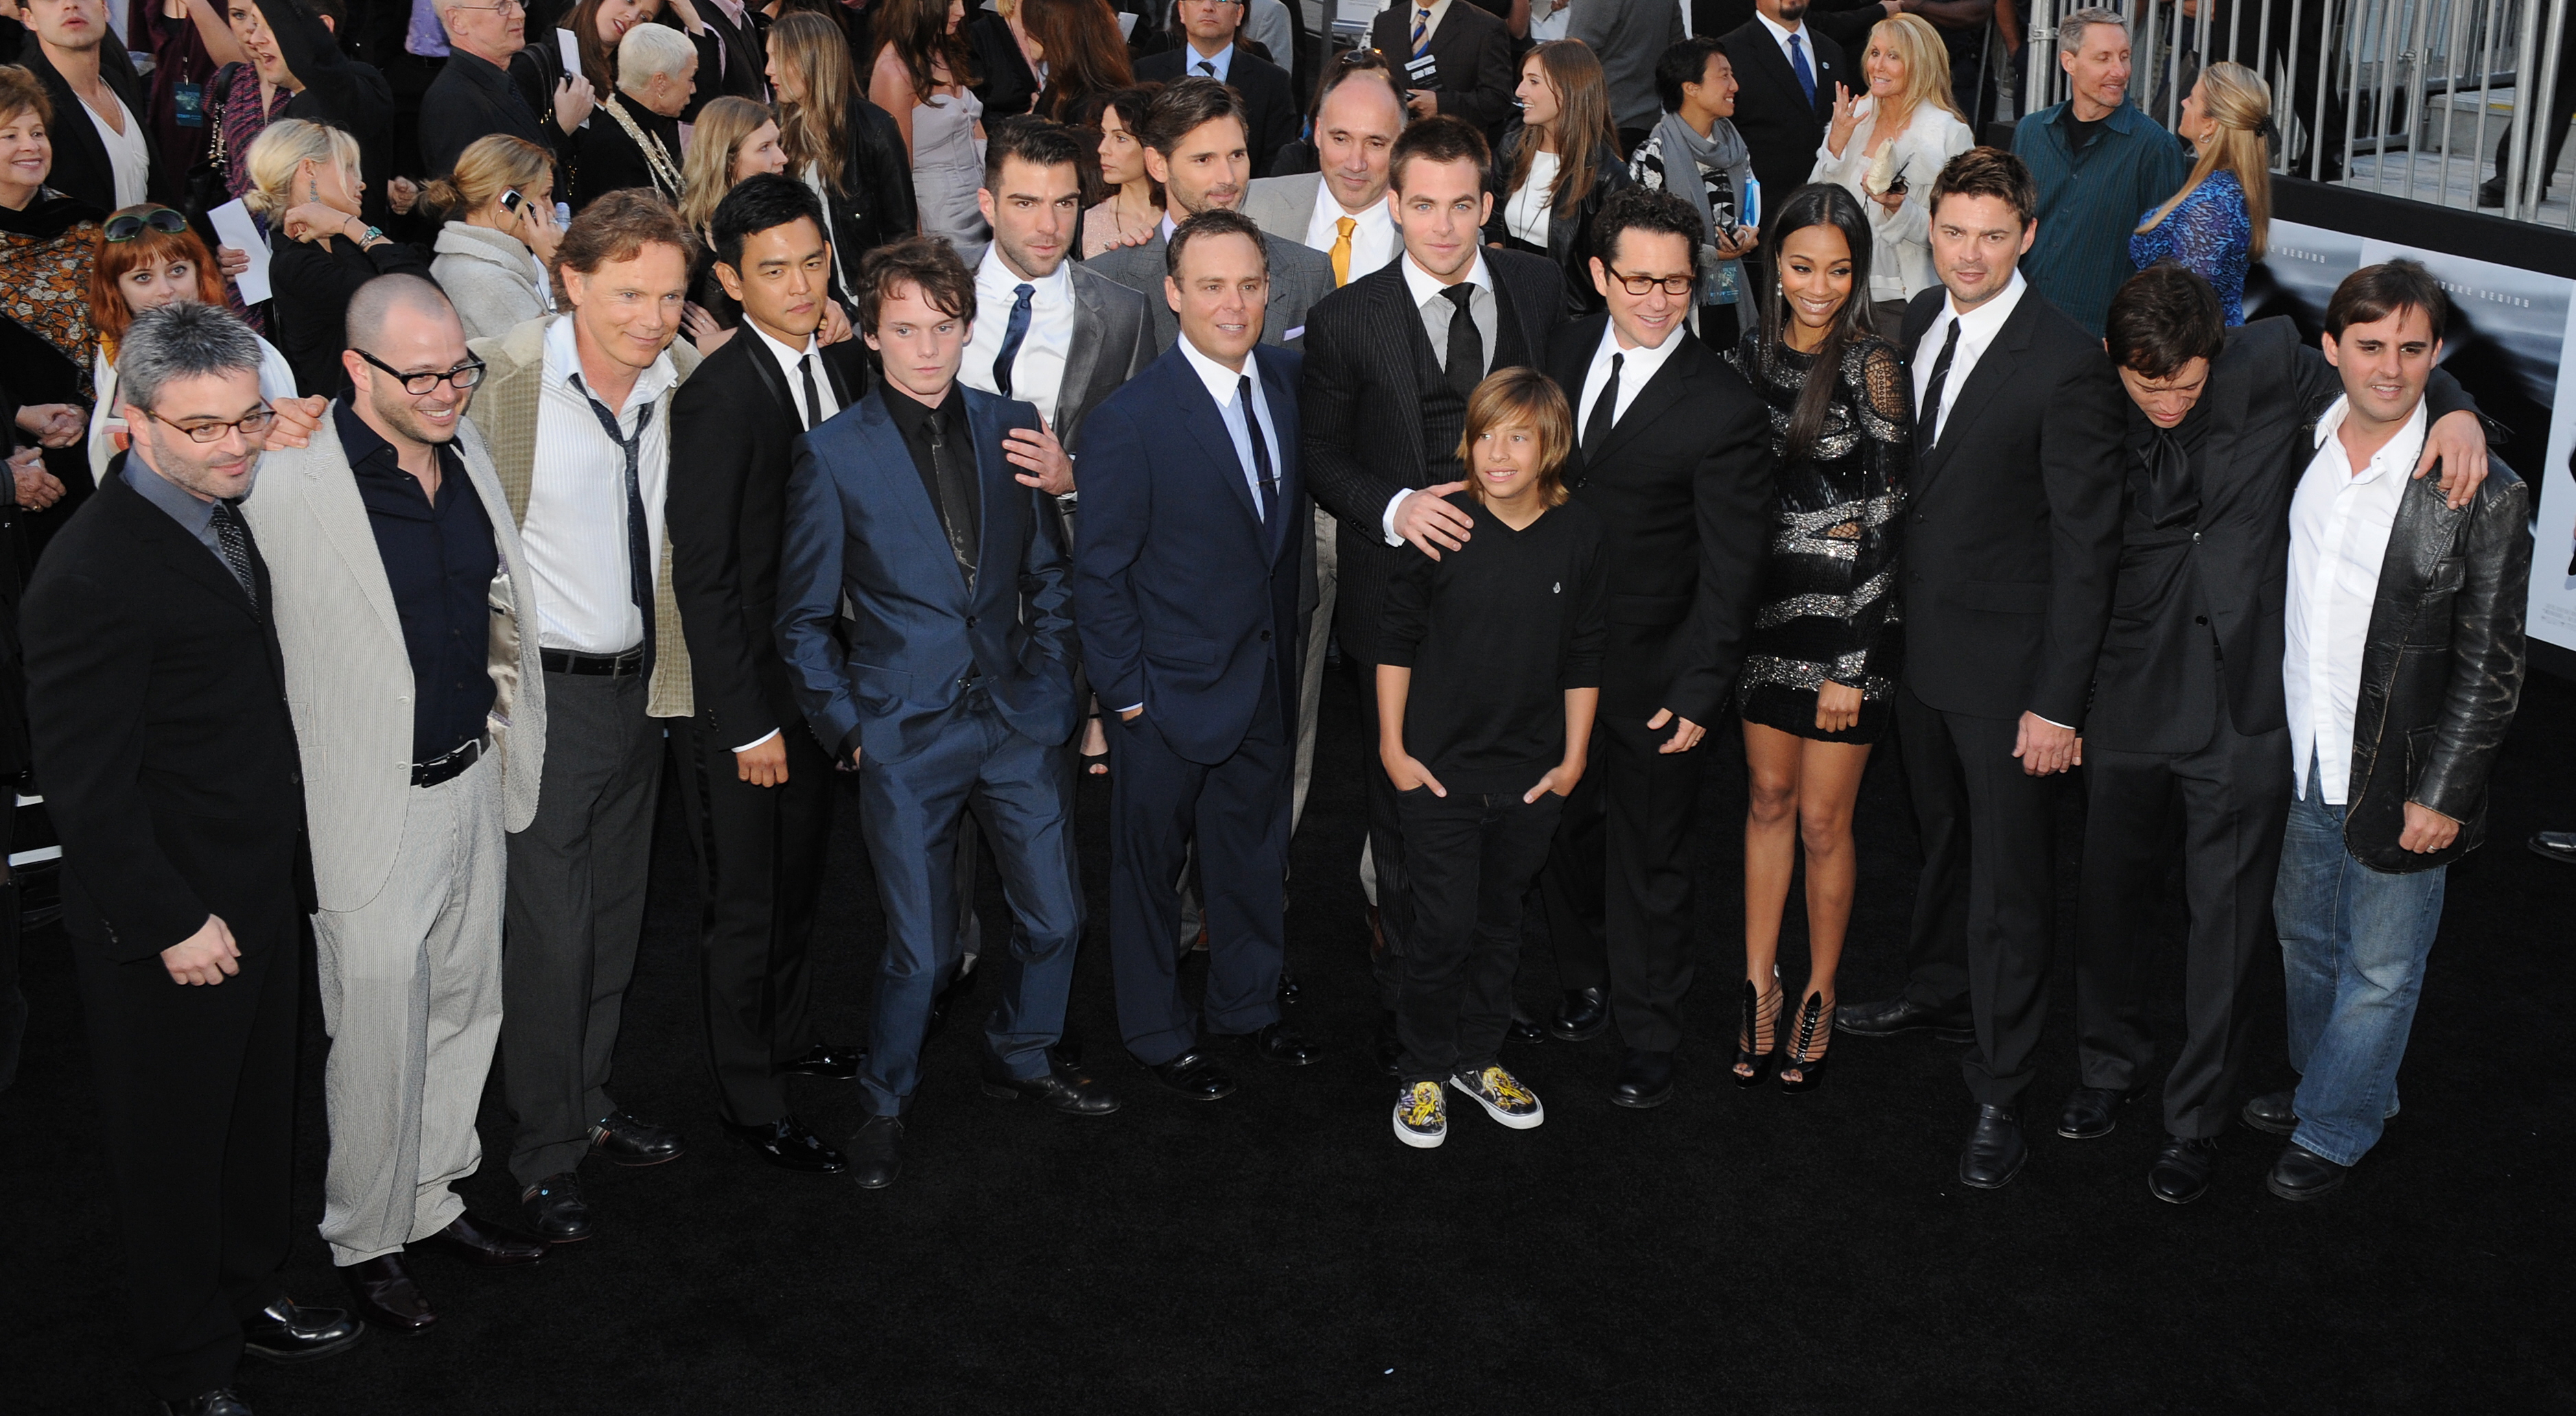 The cast pose for a group photo on the red carpet as they arrives at Grauman's Chinese Theatre in Hollywood for the premiere of the movie "Star Trek" in Los Angeles on April 30, 2009.         AFP PHOTO/Mark RALSTON / AFP PHOTO / MARK RALSTON